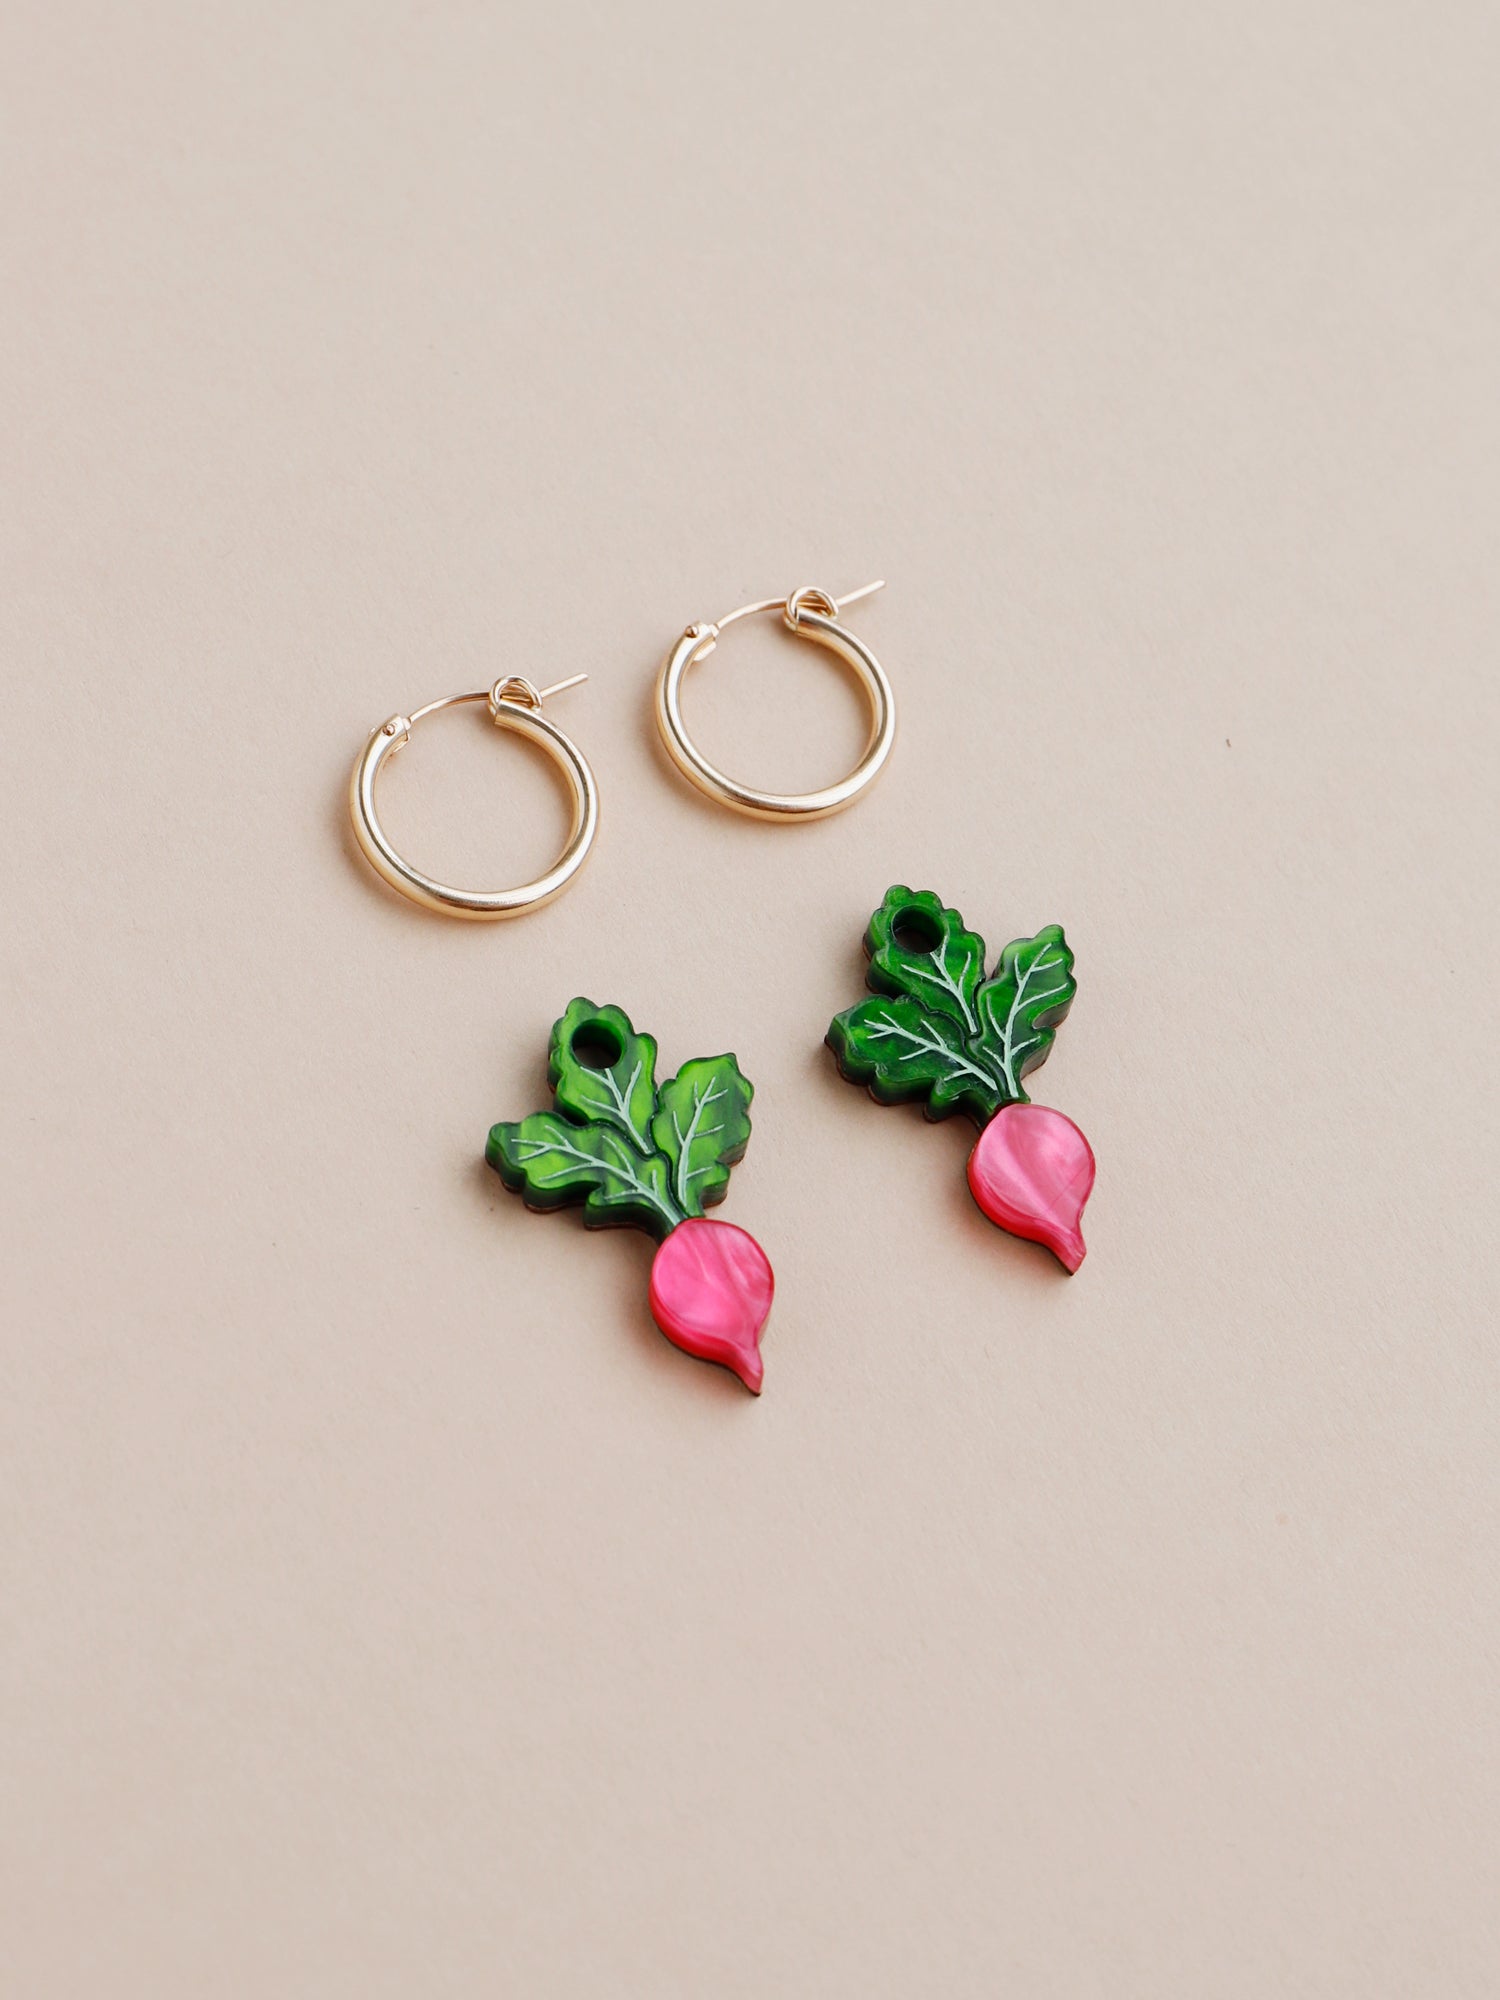 Pink and green acrylic mini radish charm earrings with optional gold-filled hoops. Handmade in London by Wolf & Moon.